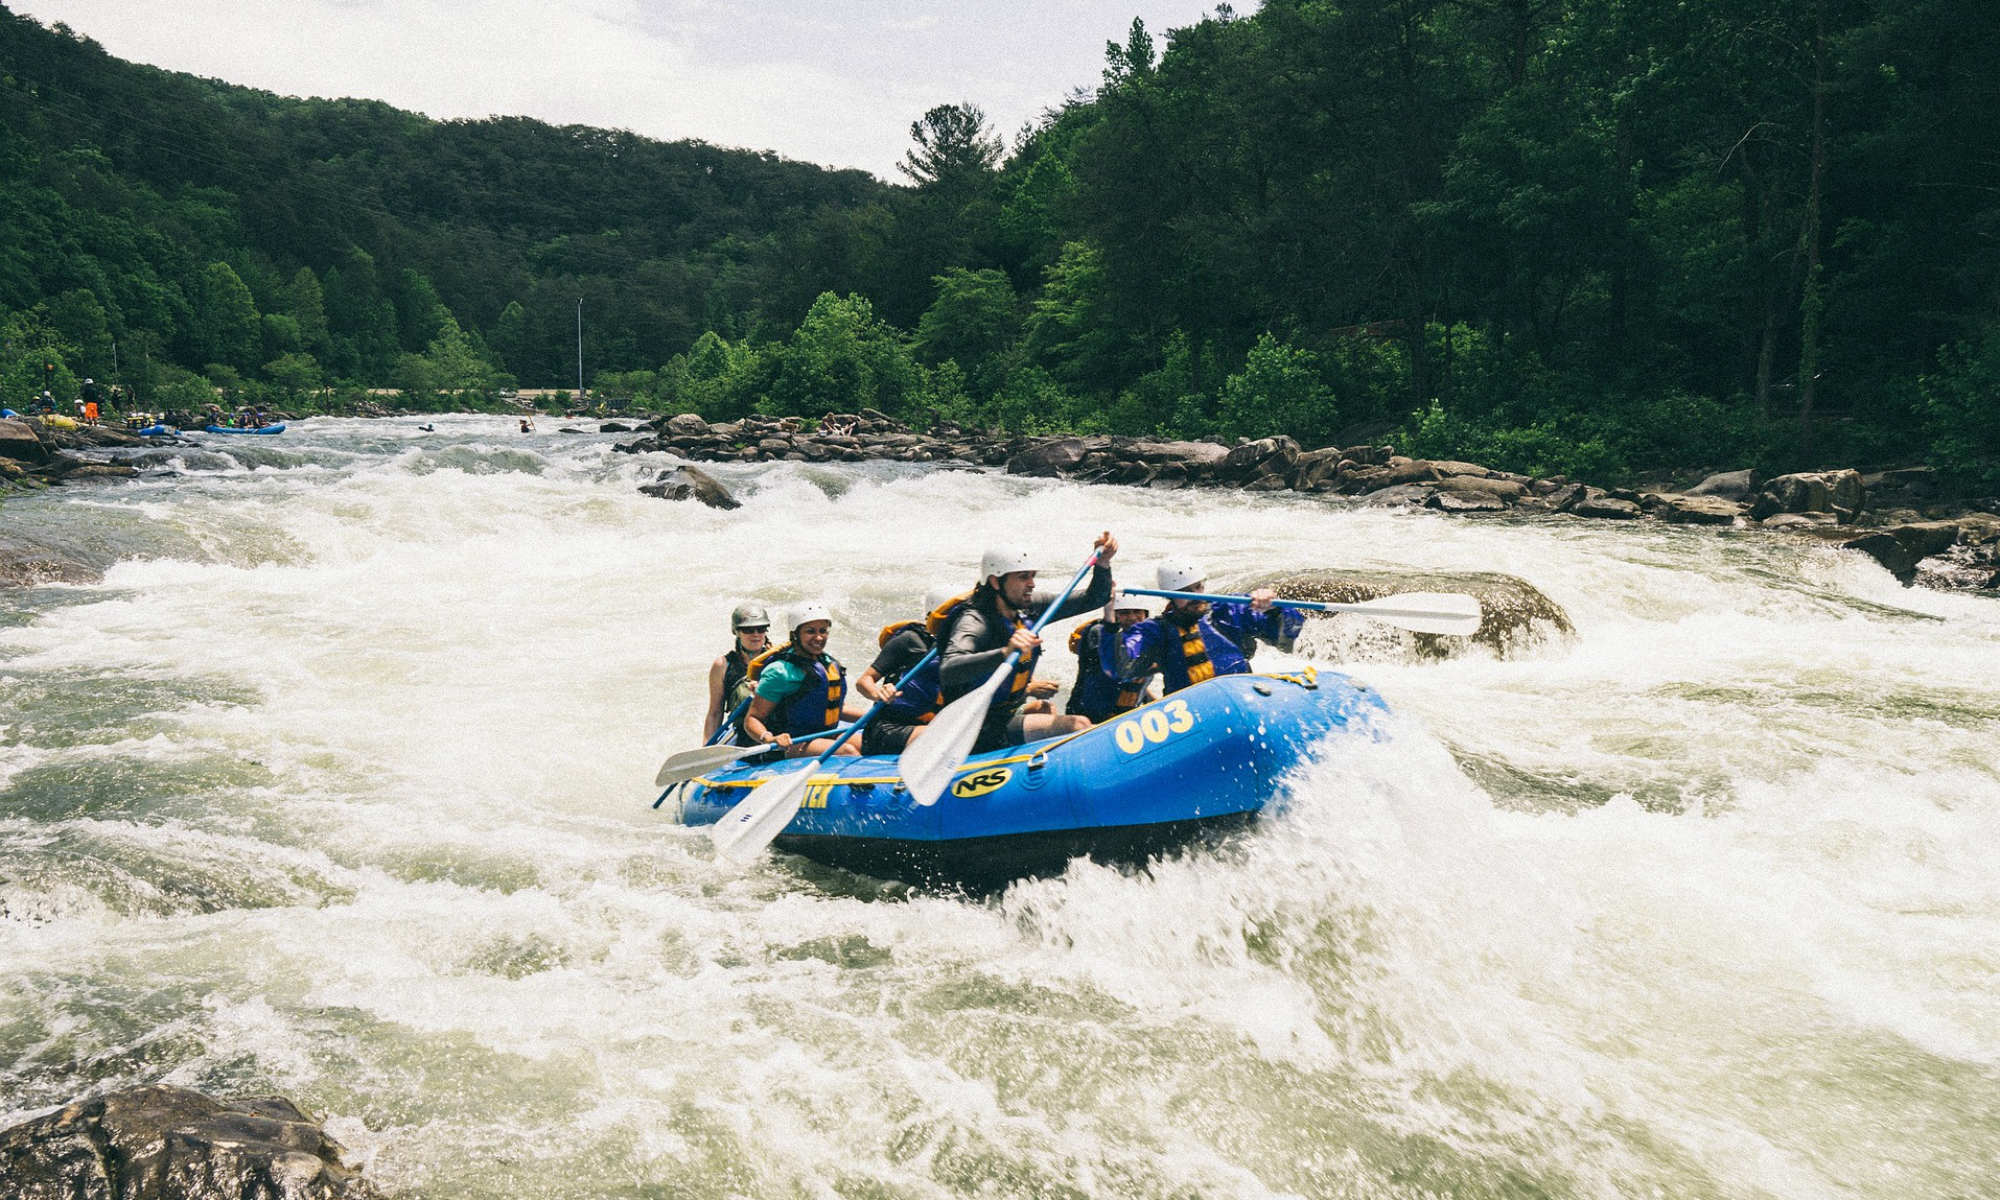 A group of people rafting on a turbulent river.